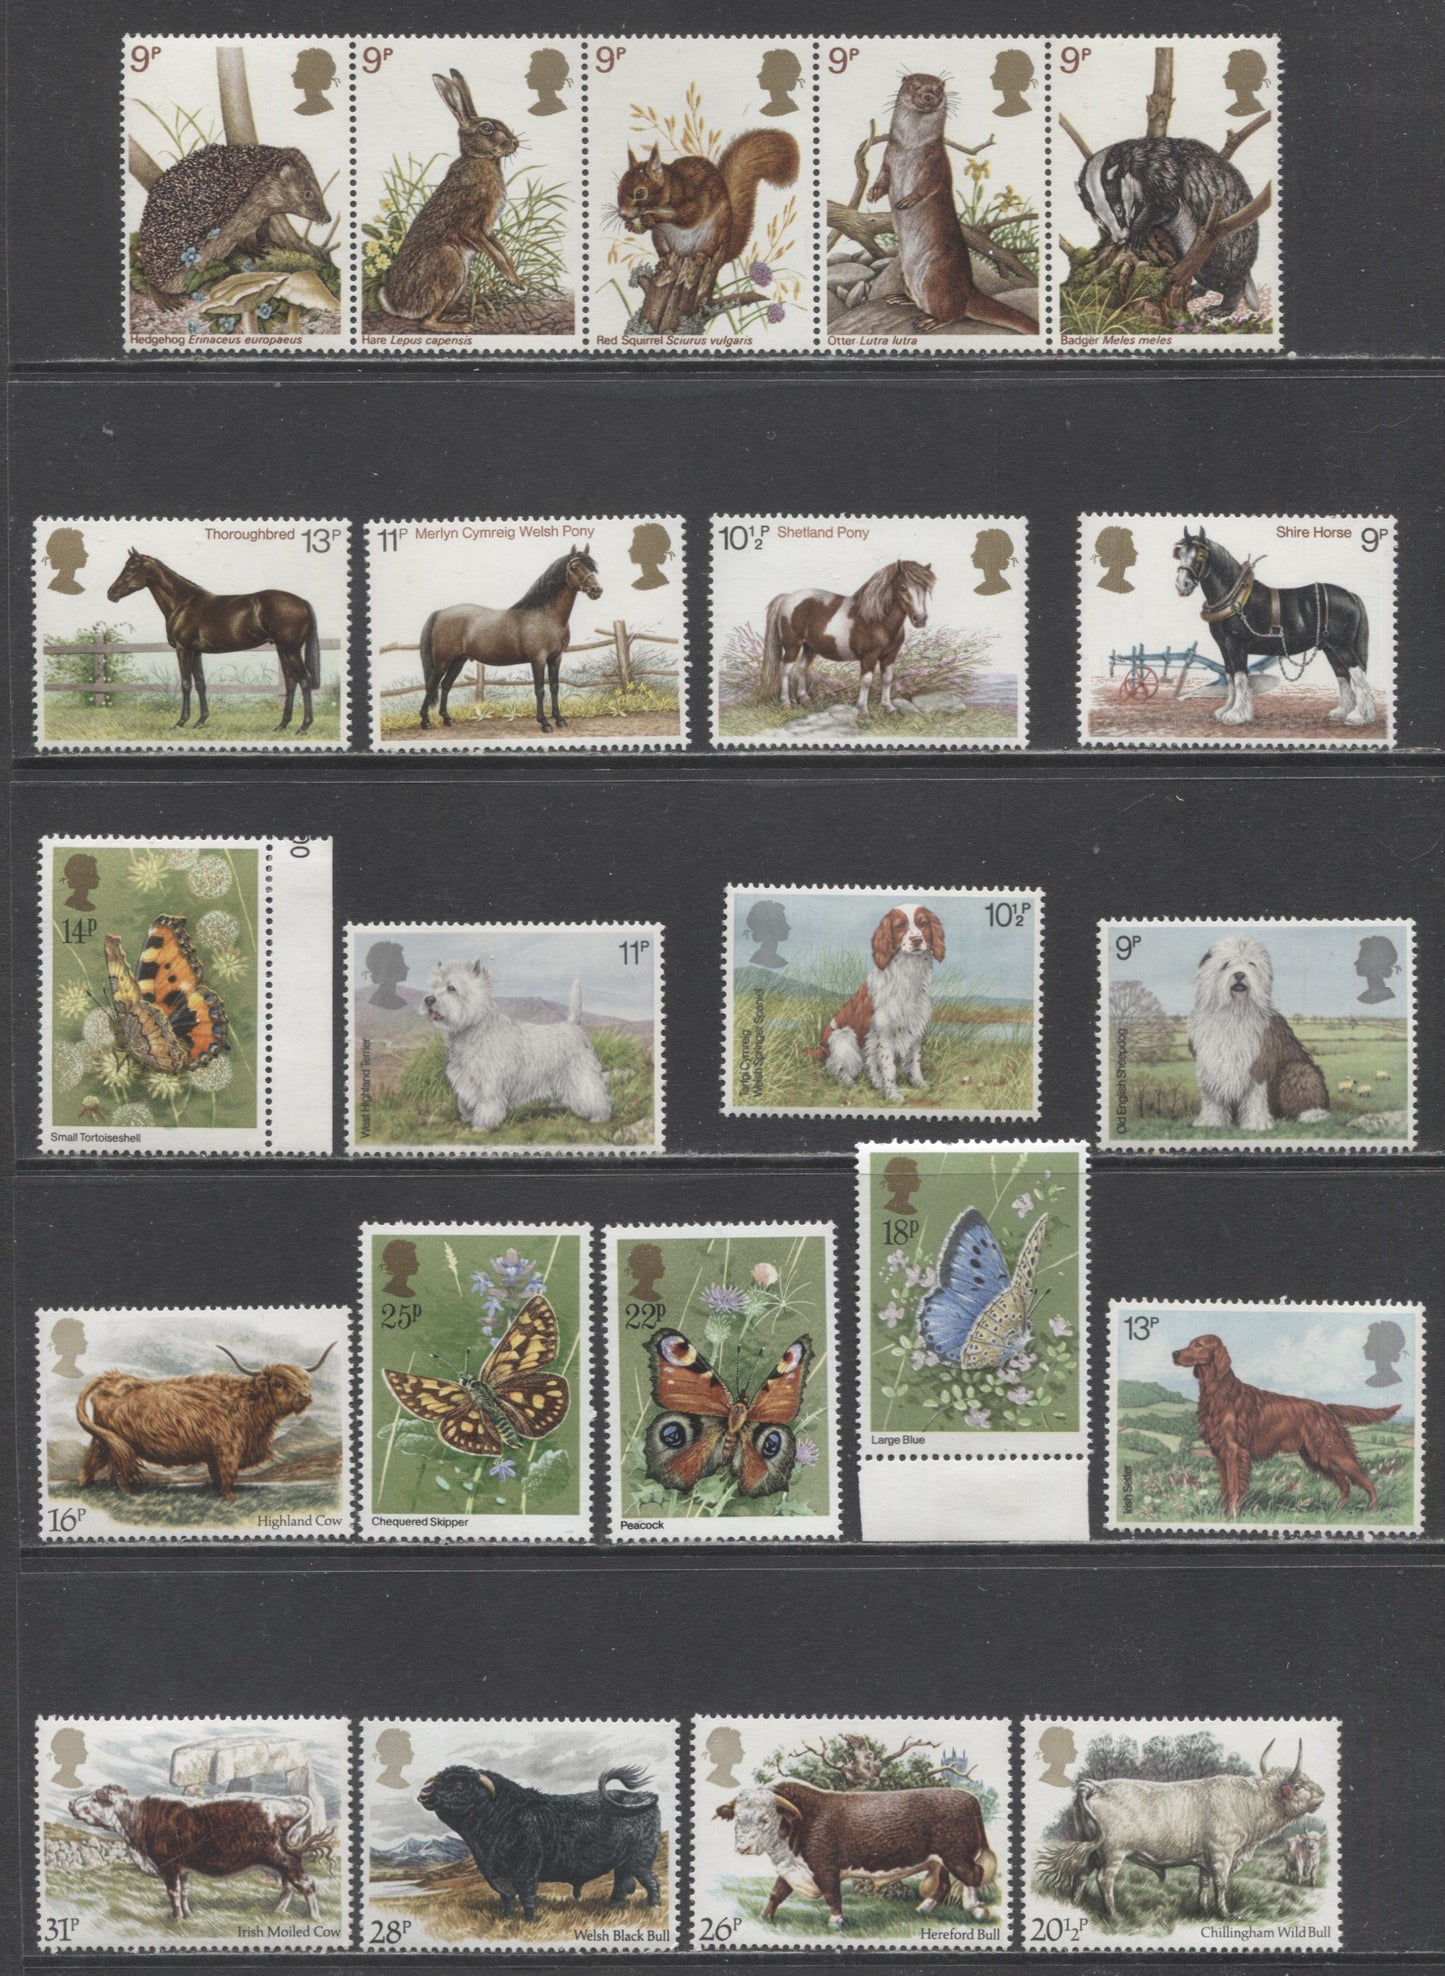 Lot 16 Great Britain SC#820a/1052 1977-1984 Wildlife Protection, Shire Horses, English Sheep Dog, Butterflies & Cattle Breeders Association Issues, 18 VFNH/OG Singles & Strip Of 4, Click on Listing to See ALL Pictures, 2017 Scott Cat. $12.8